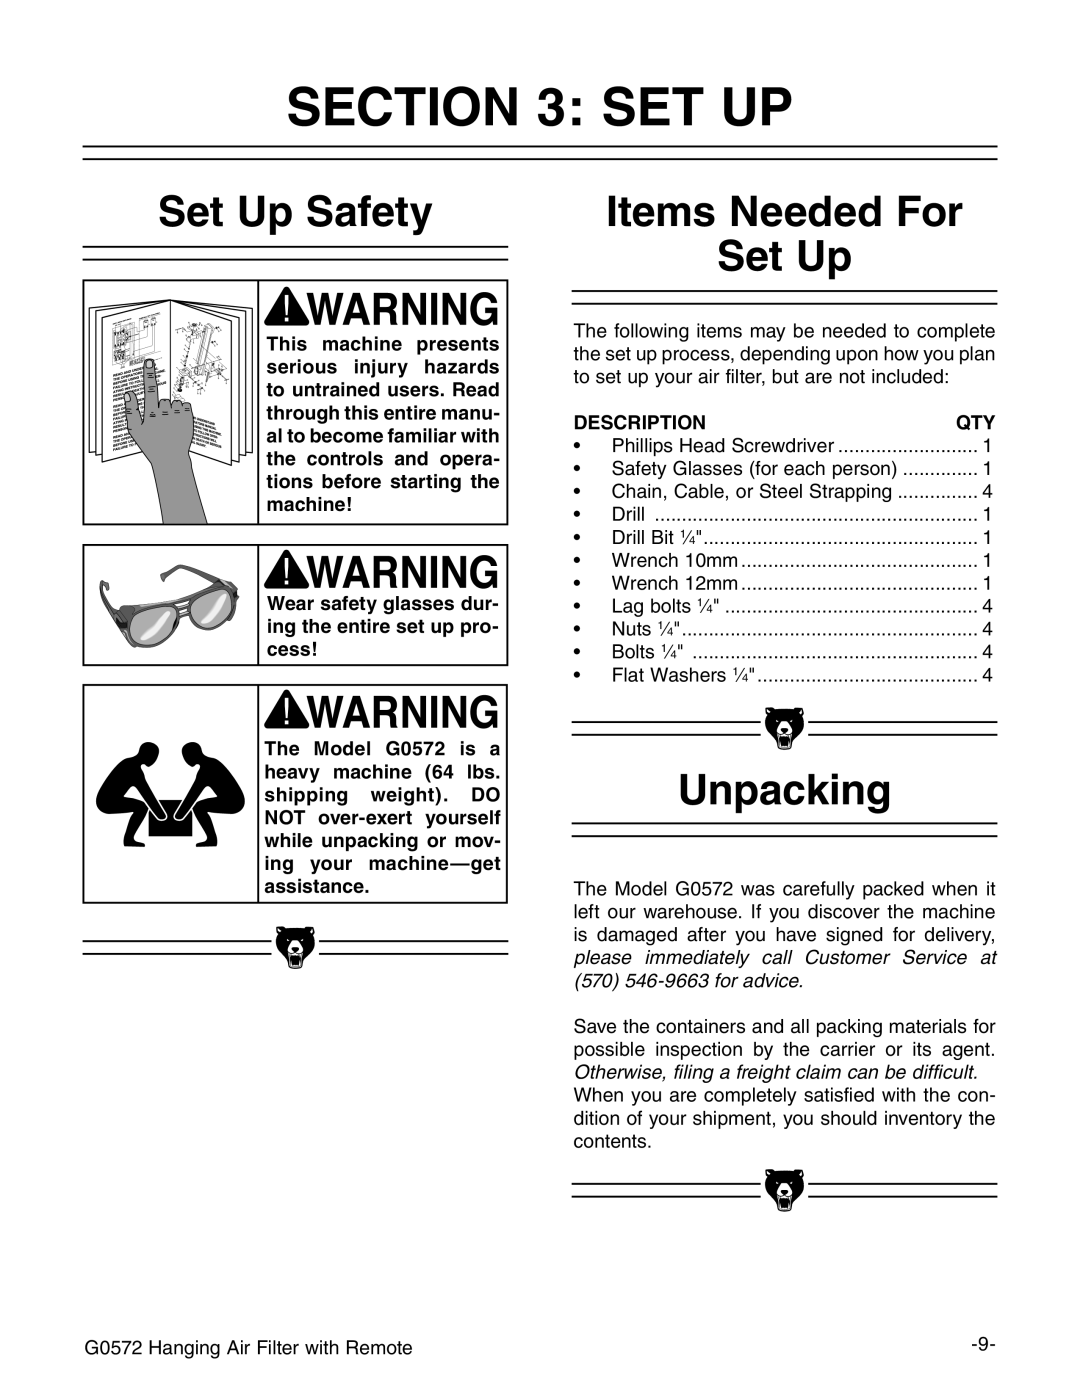 Grizzly G0572 instruction manual Set Up Safety, Items Needed For Set Up, Unpacking 